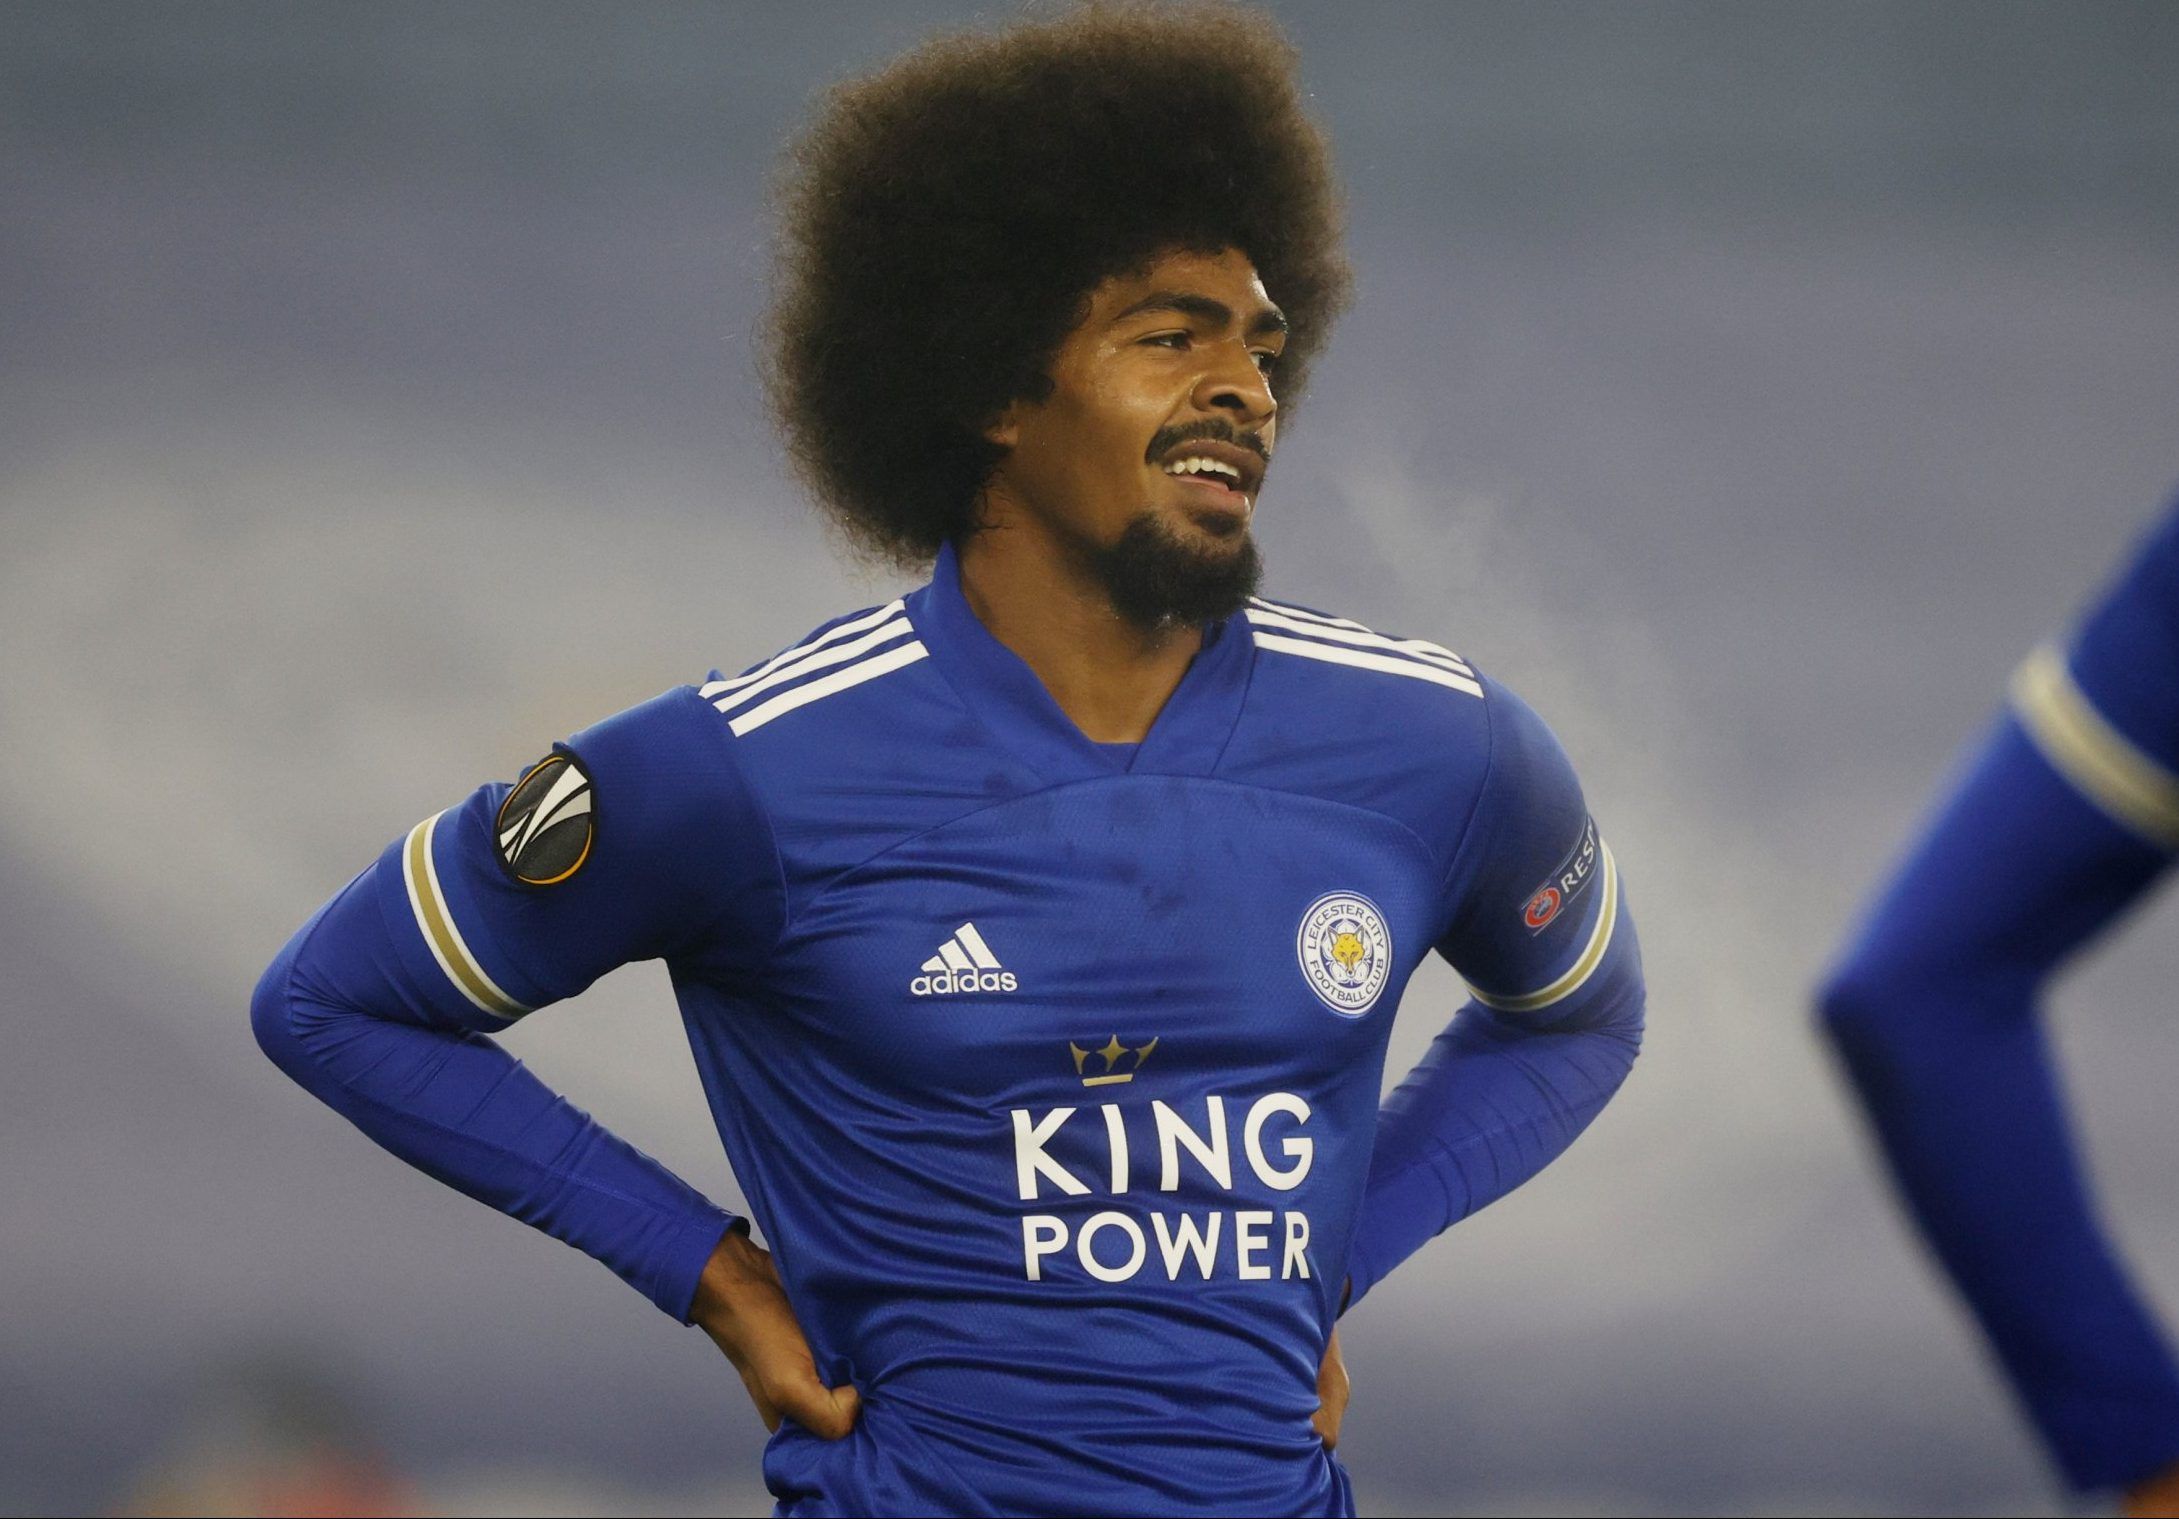 Leicester City's Hamza Choudhury reacts during Europa League - Group G tie v S.C. Braga